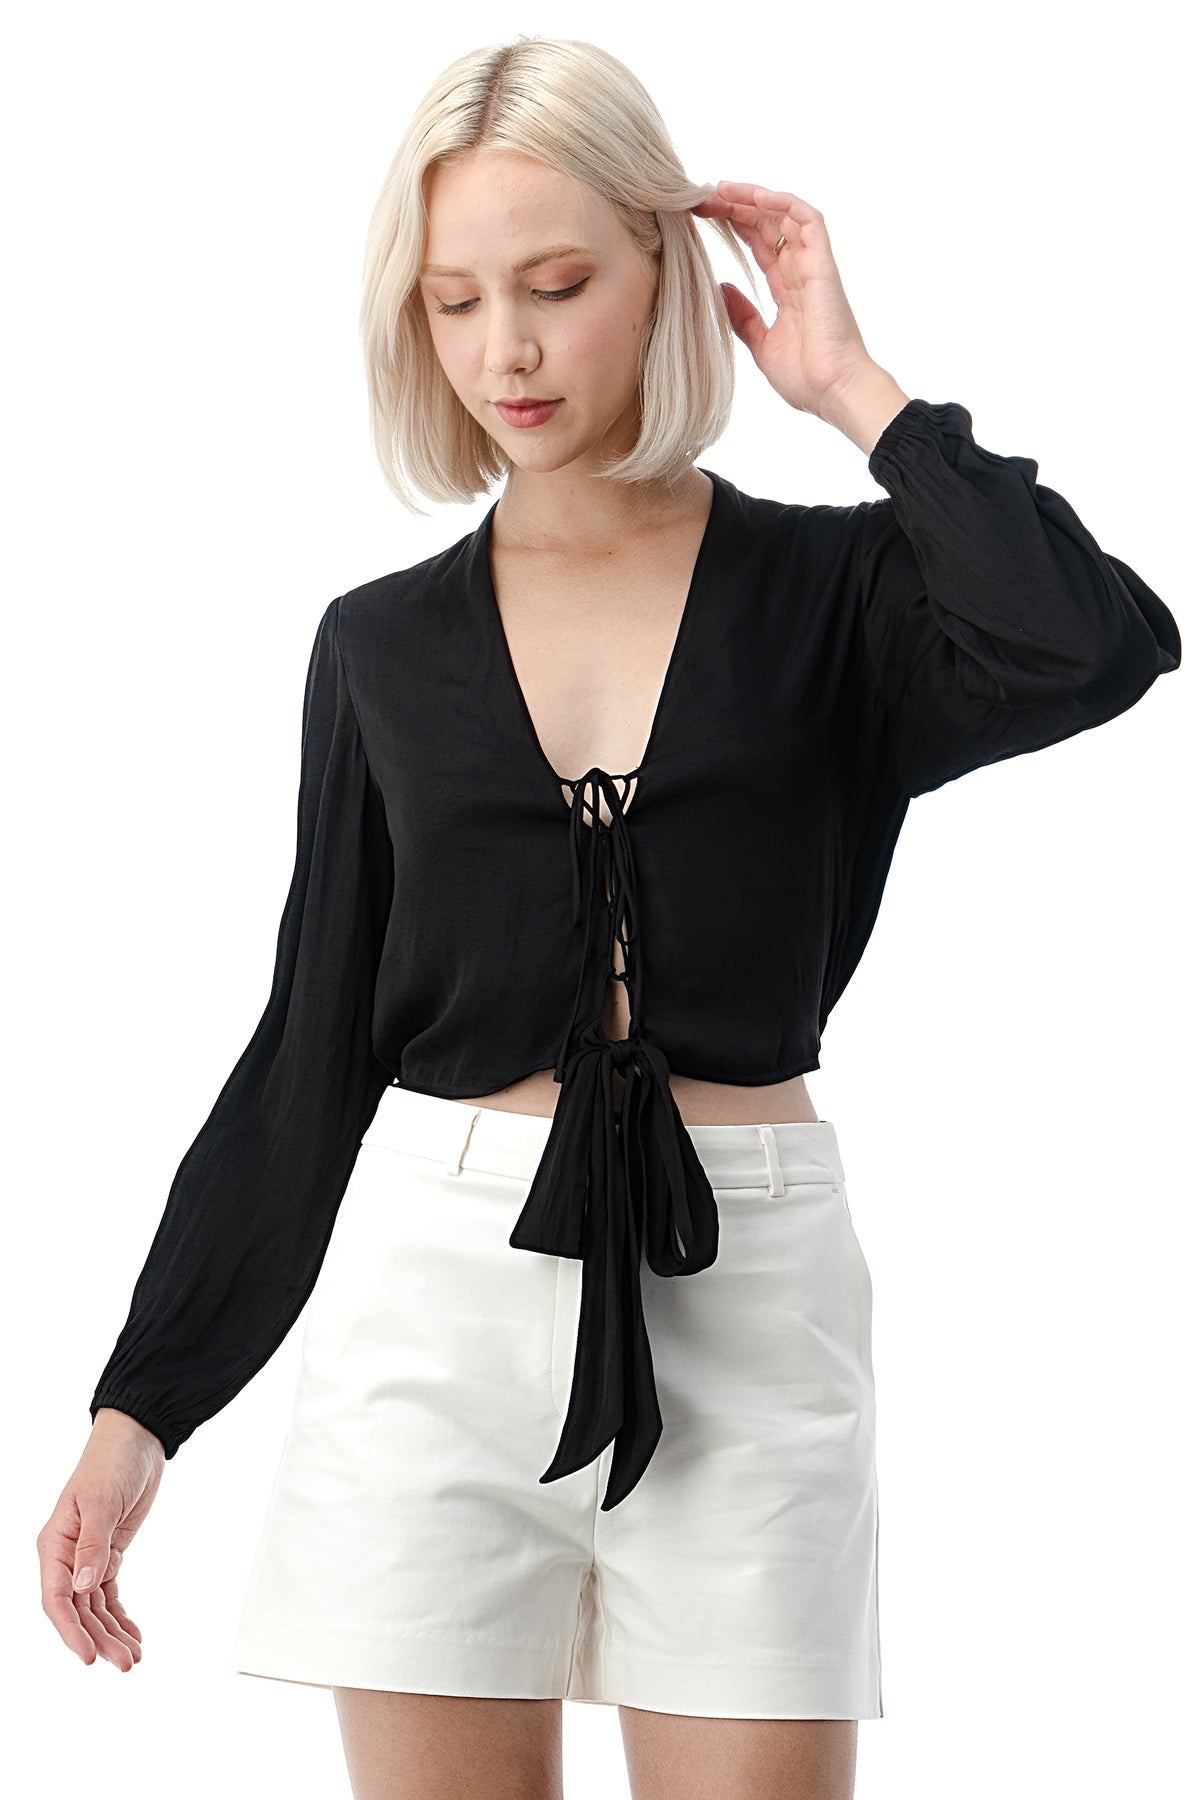 EDGY Land Girl's and Women's Self Tie Bottom V-Neck Drawstring Closure Chest Long Sleeve Fashion Blouse